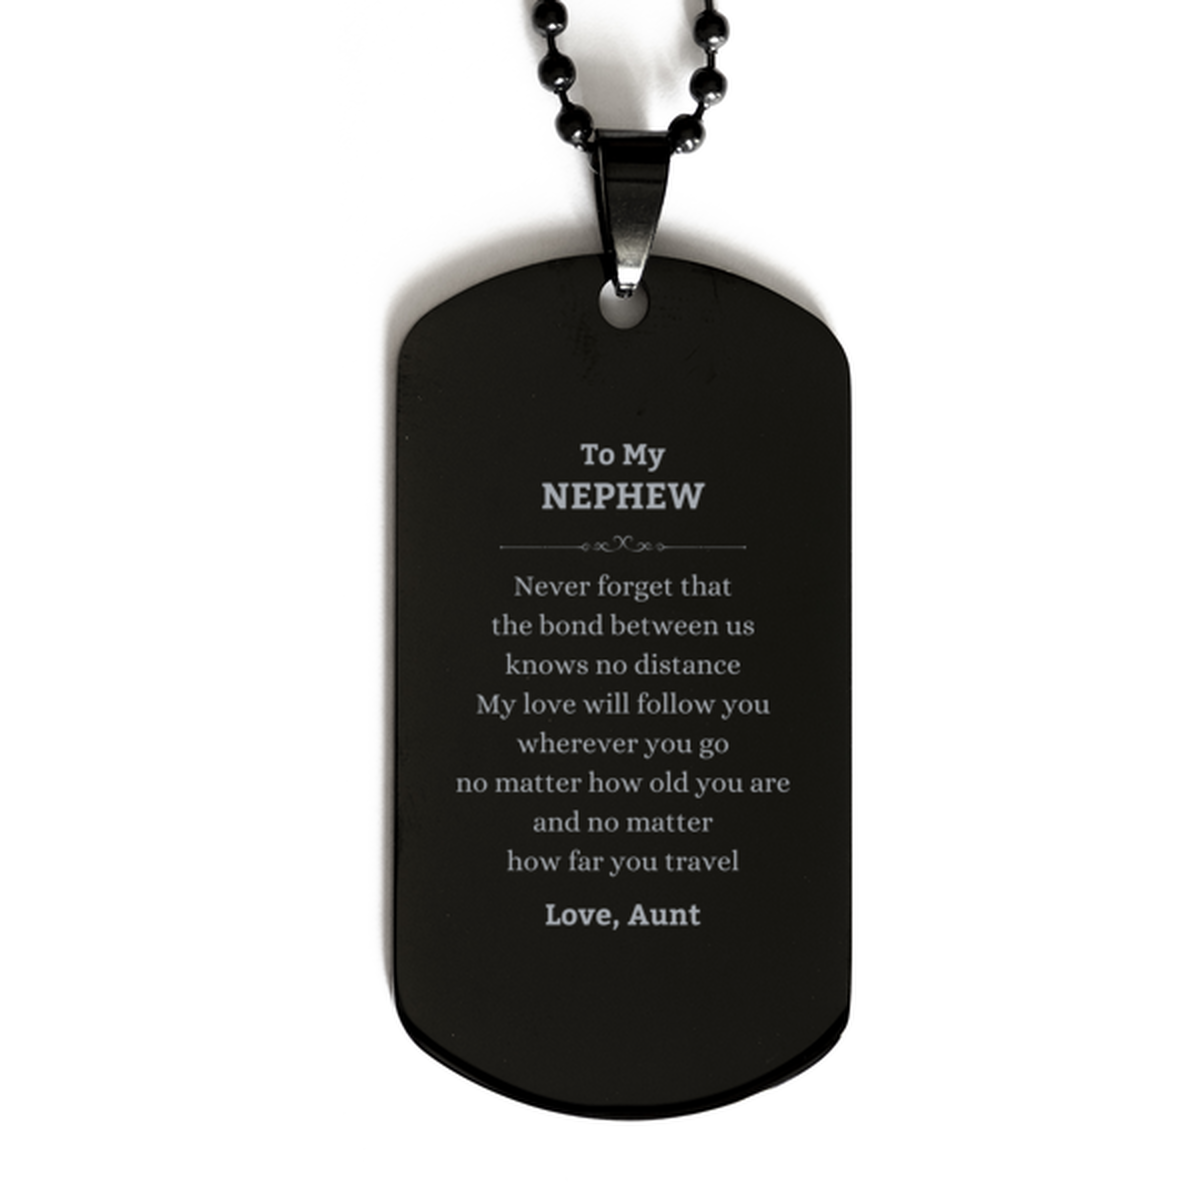 Nephew Birthday Gifts from Aunt, Adjustable Black Dog Tag for Nephew Christmas Graduation Unique Gifts Nephew Never forget that the bond between us knows no distance. Love, Aunt